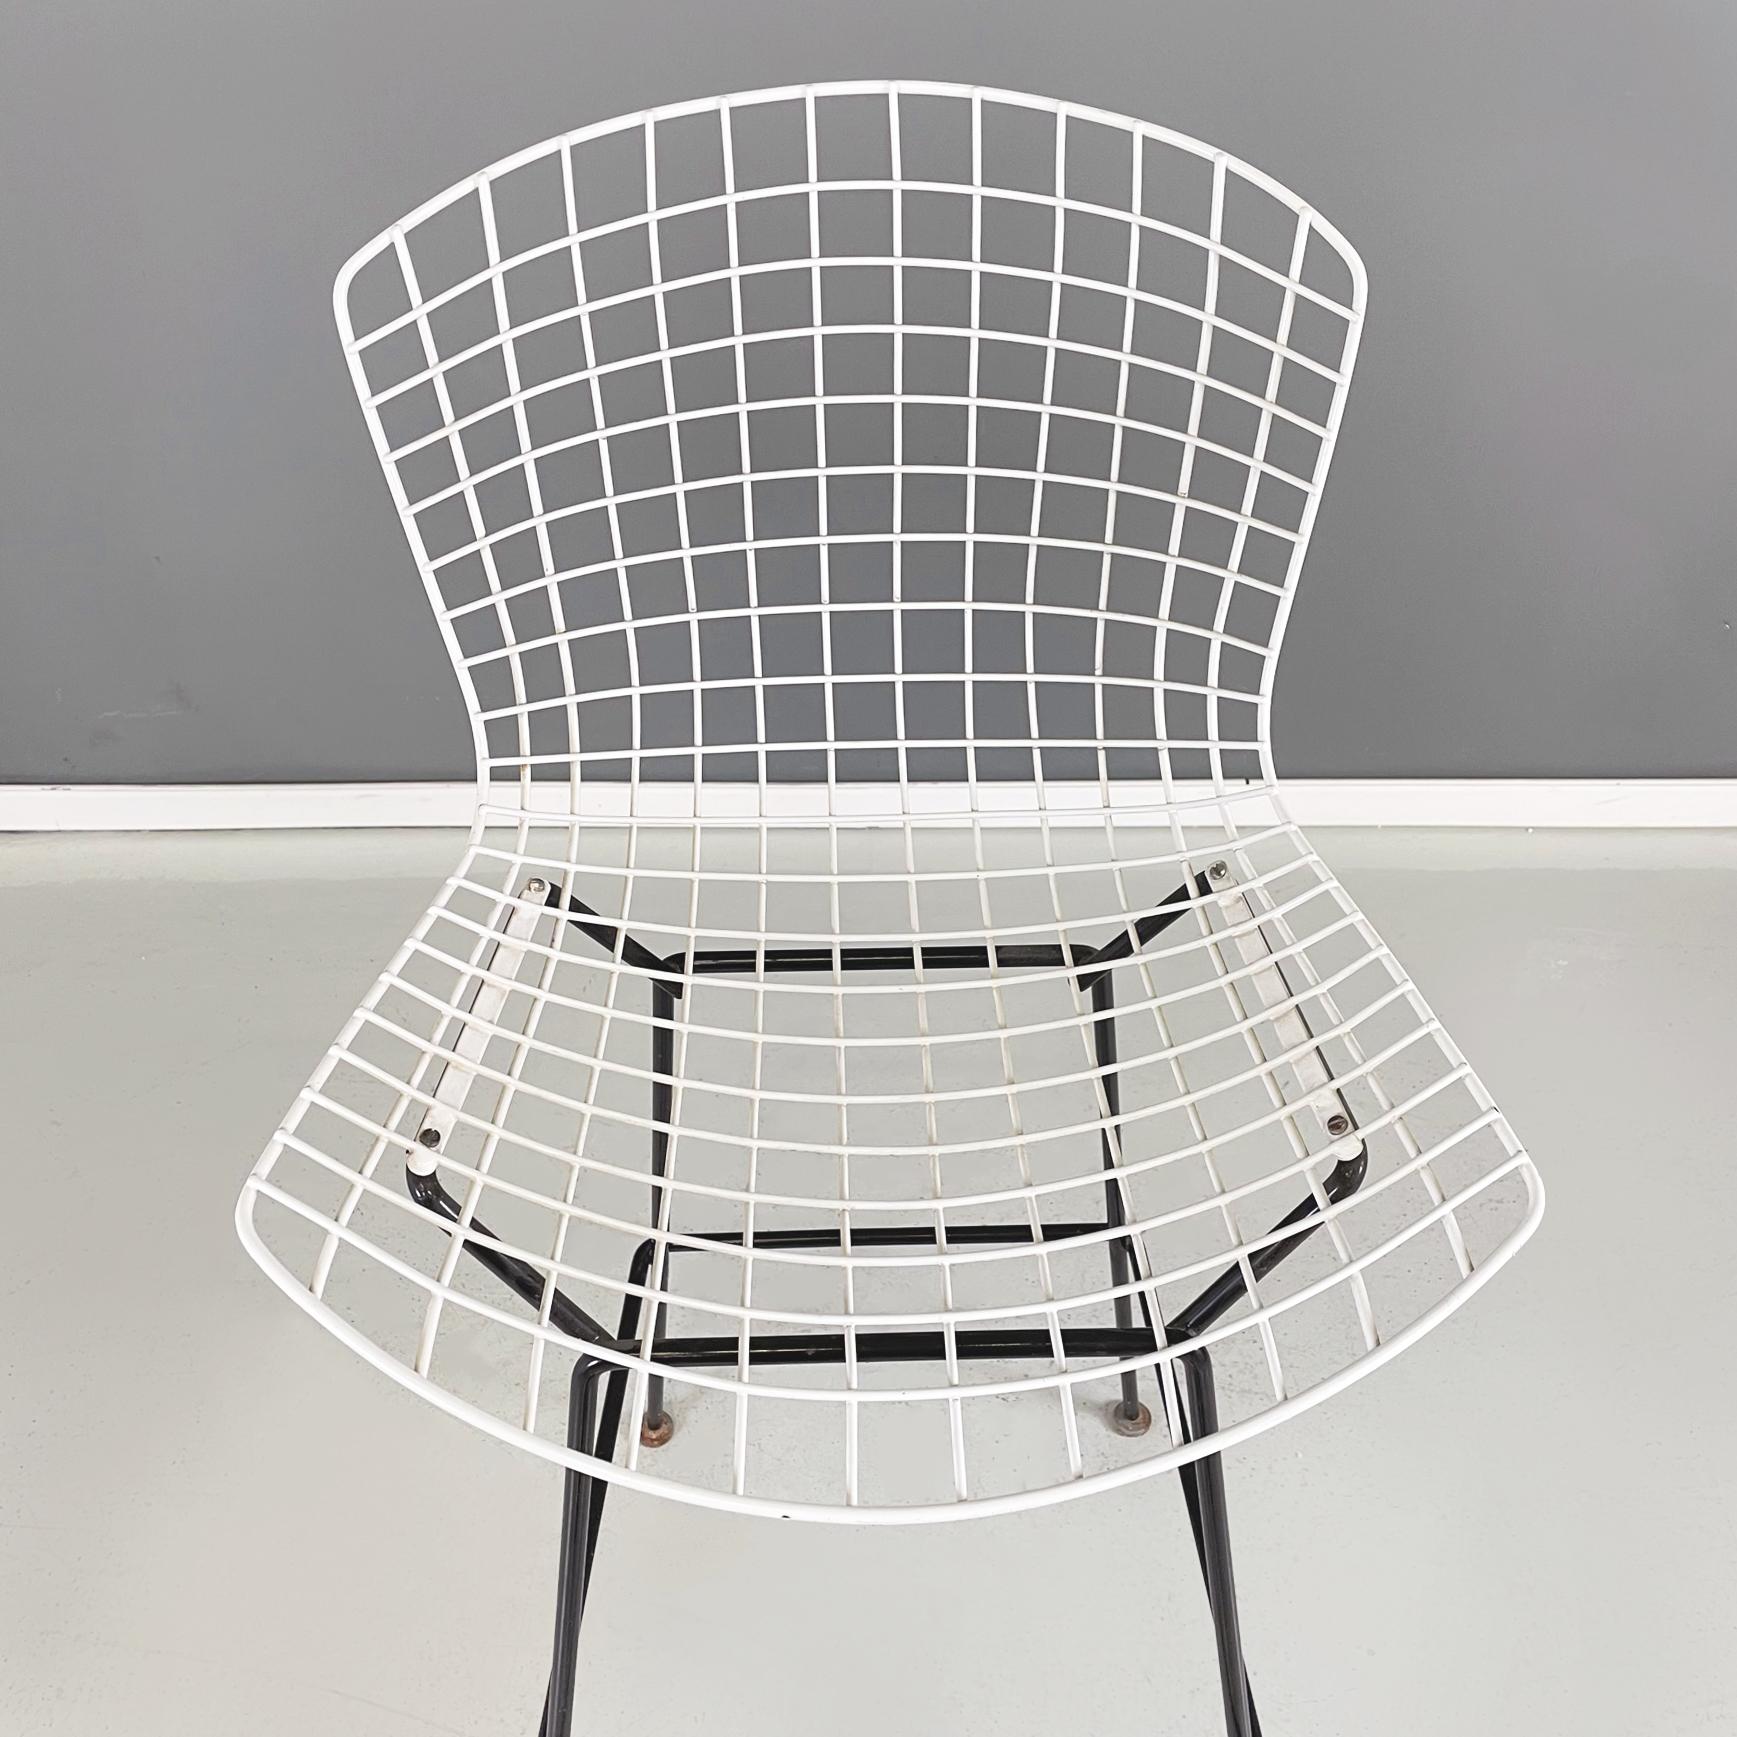 American Midcentury Black White Metal High Stools by Bertoia for Knoll, 1960s For Sale 1